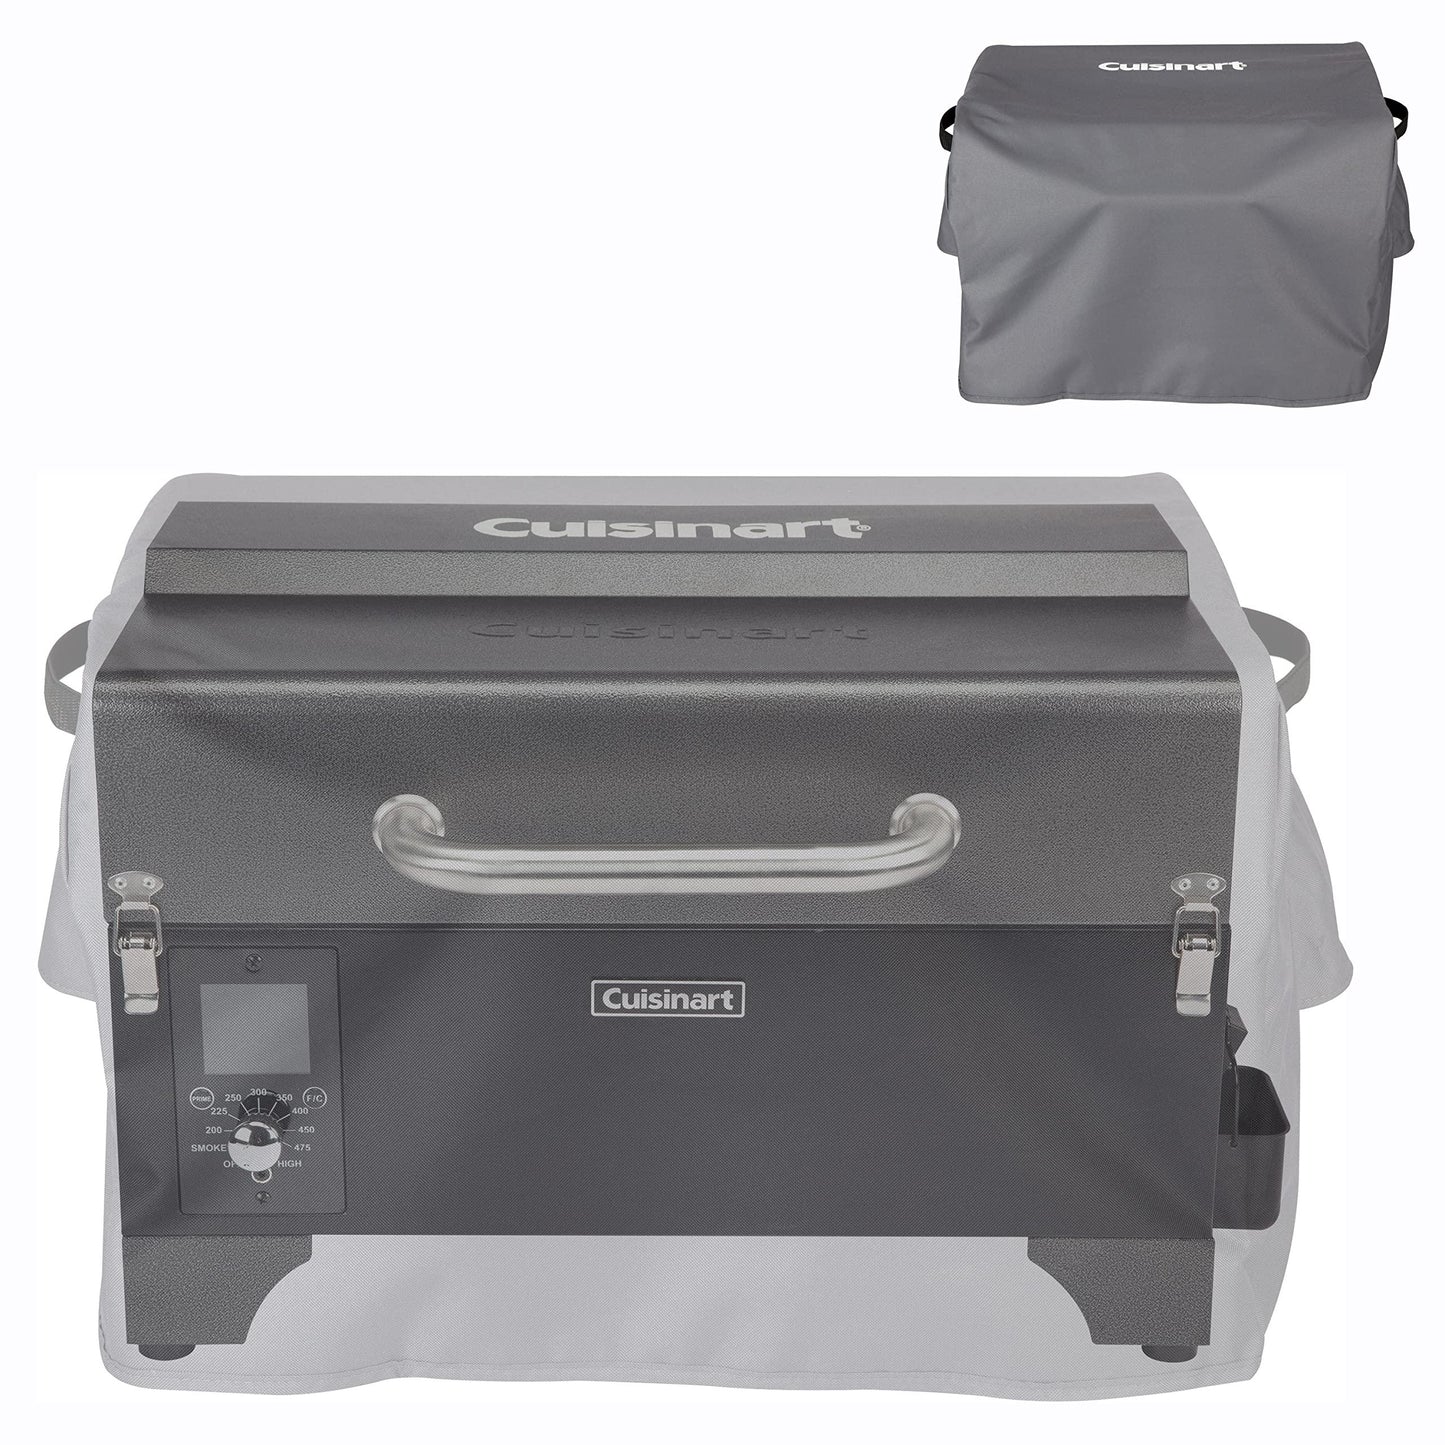 Cuisinart CPG-256 Portable Wood Pellet Grill and Smoker, Black and Dark Gray - CookCave